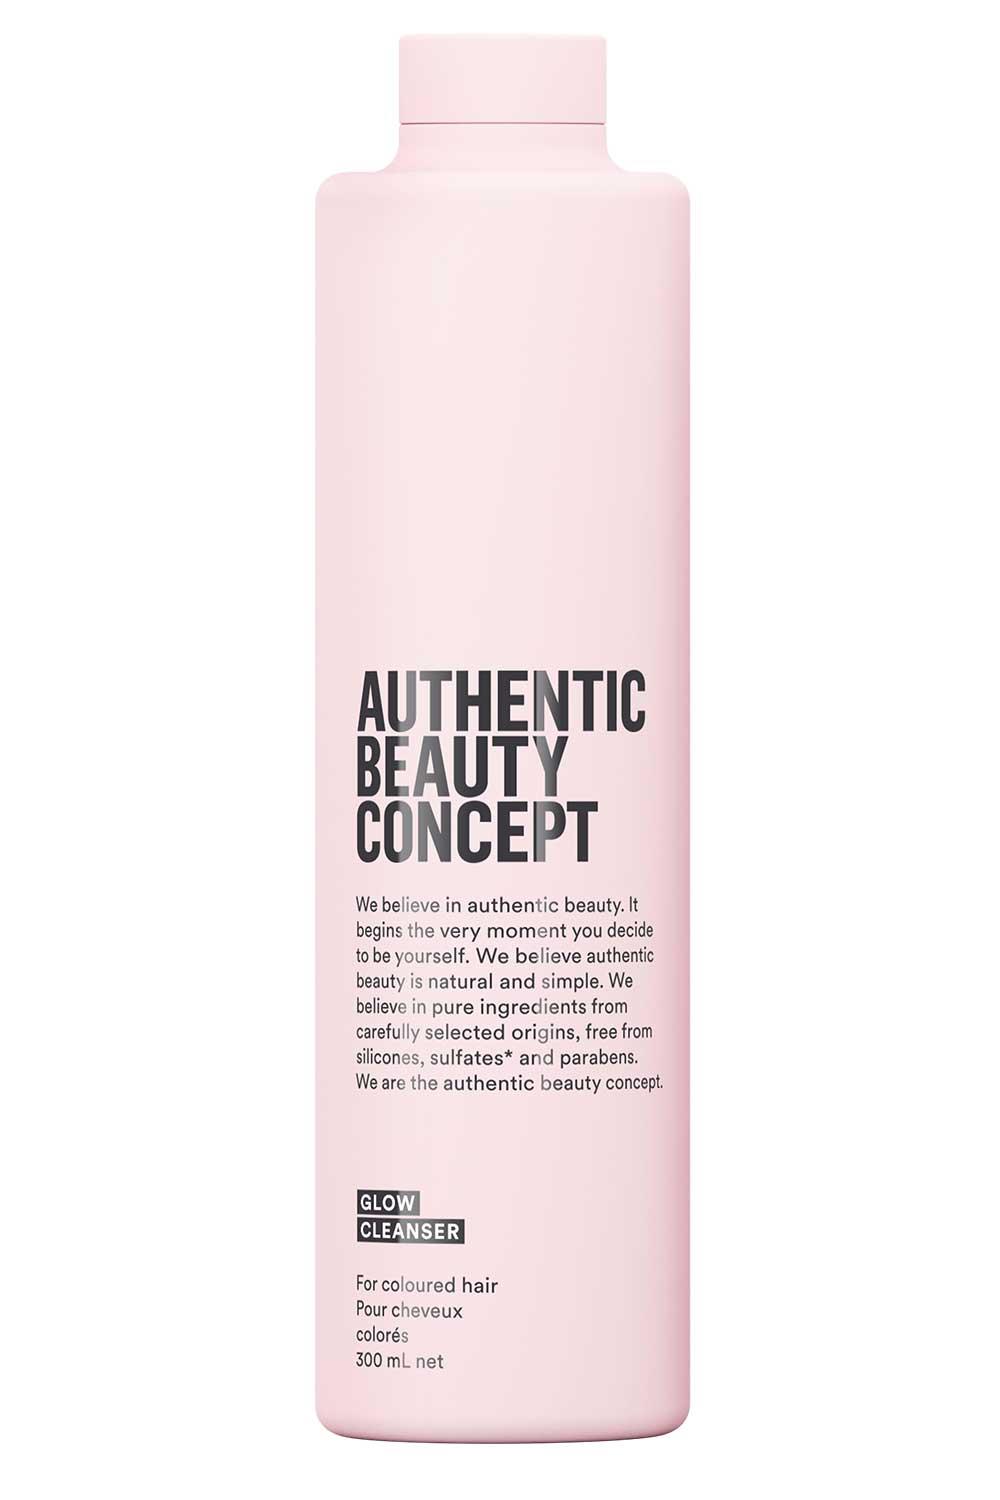  GLOW Cleanser For Colored Hair, Authentic Beauty Concept